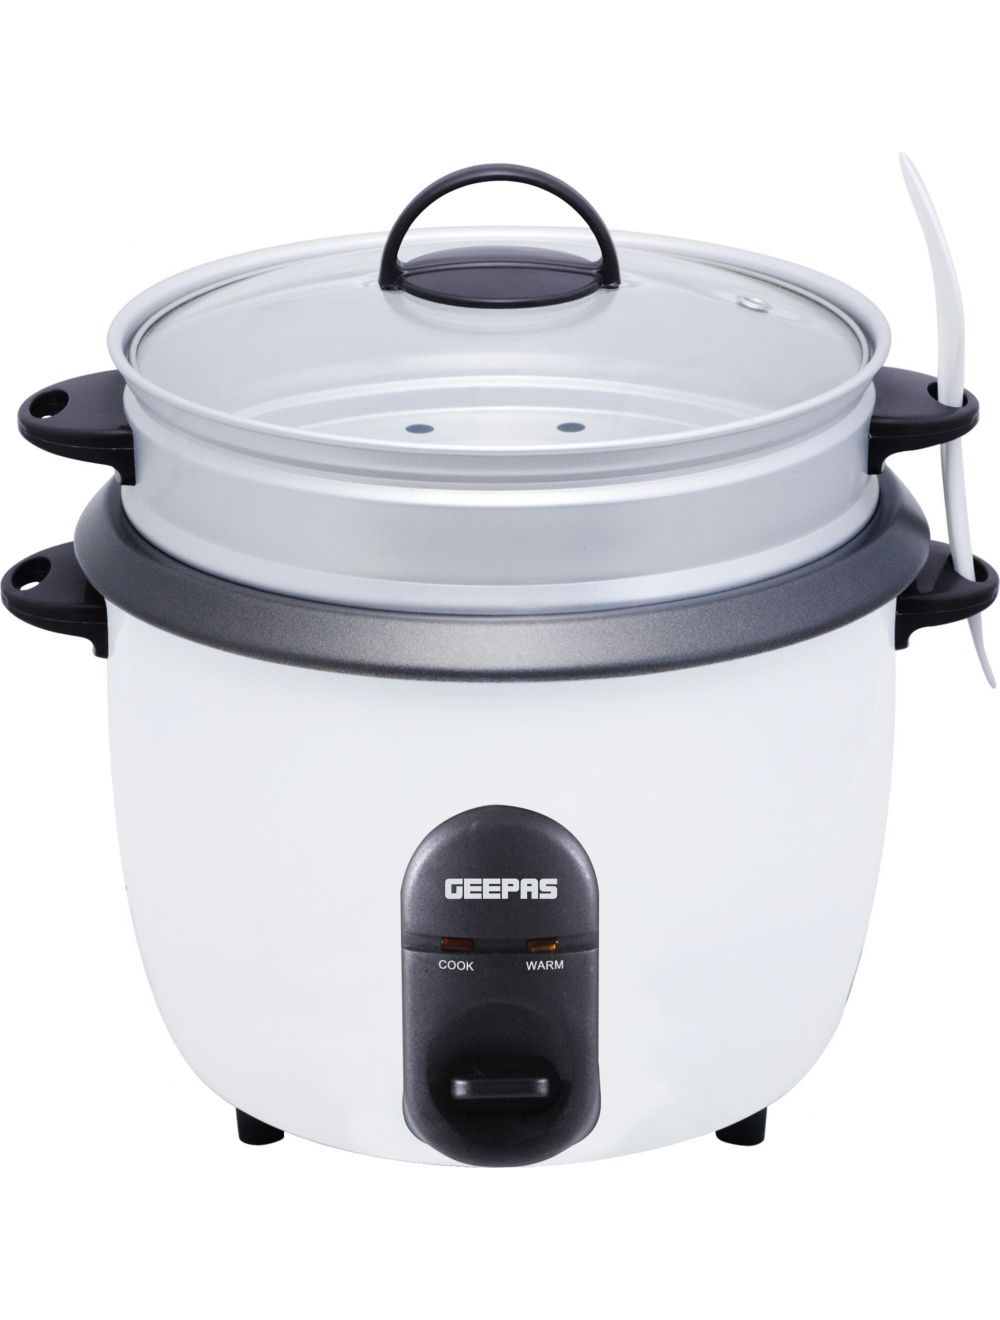 Geepas 1.5L Rice Cooker/Steamer with Non-Stick Cooking Pot